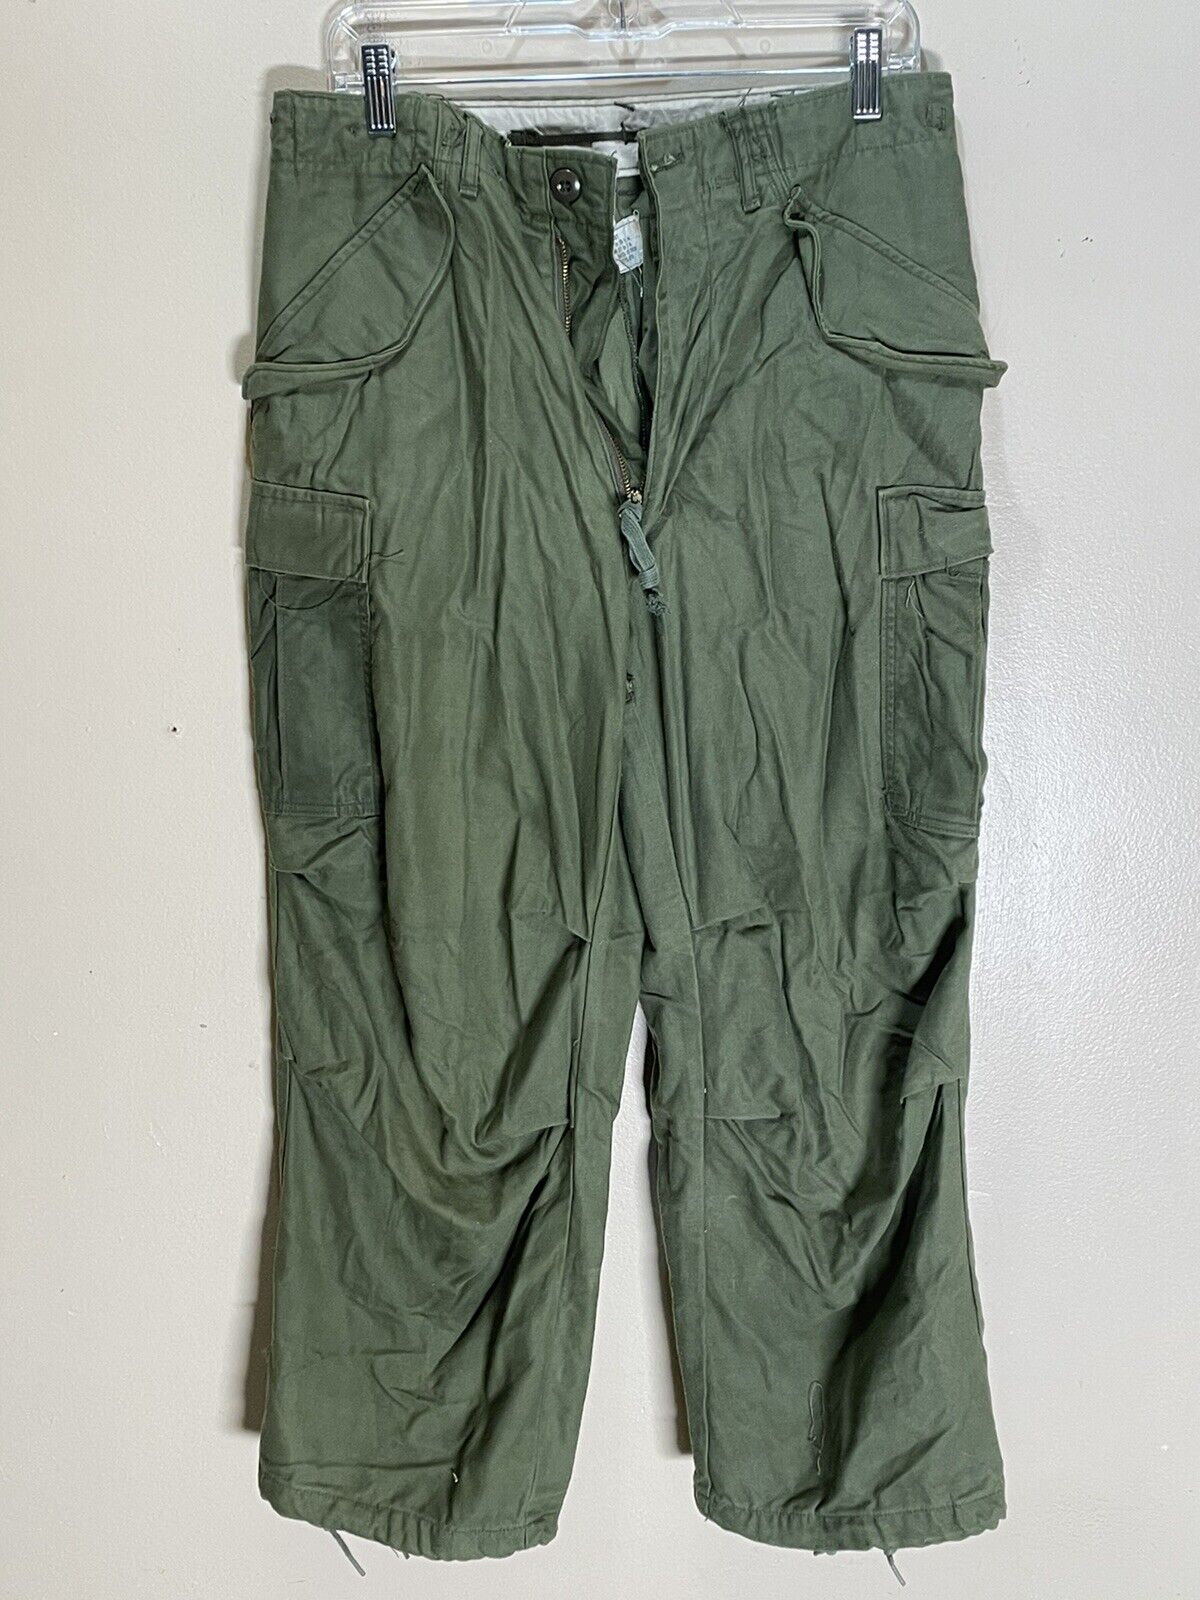 Original 1974 Dated Sateen Og-107 Field Trousers Pants Size Small Short H